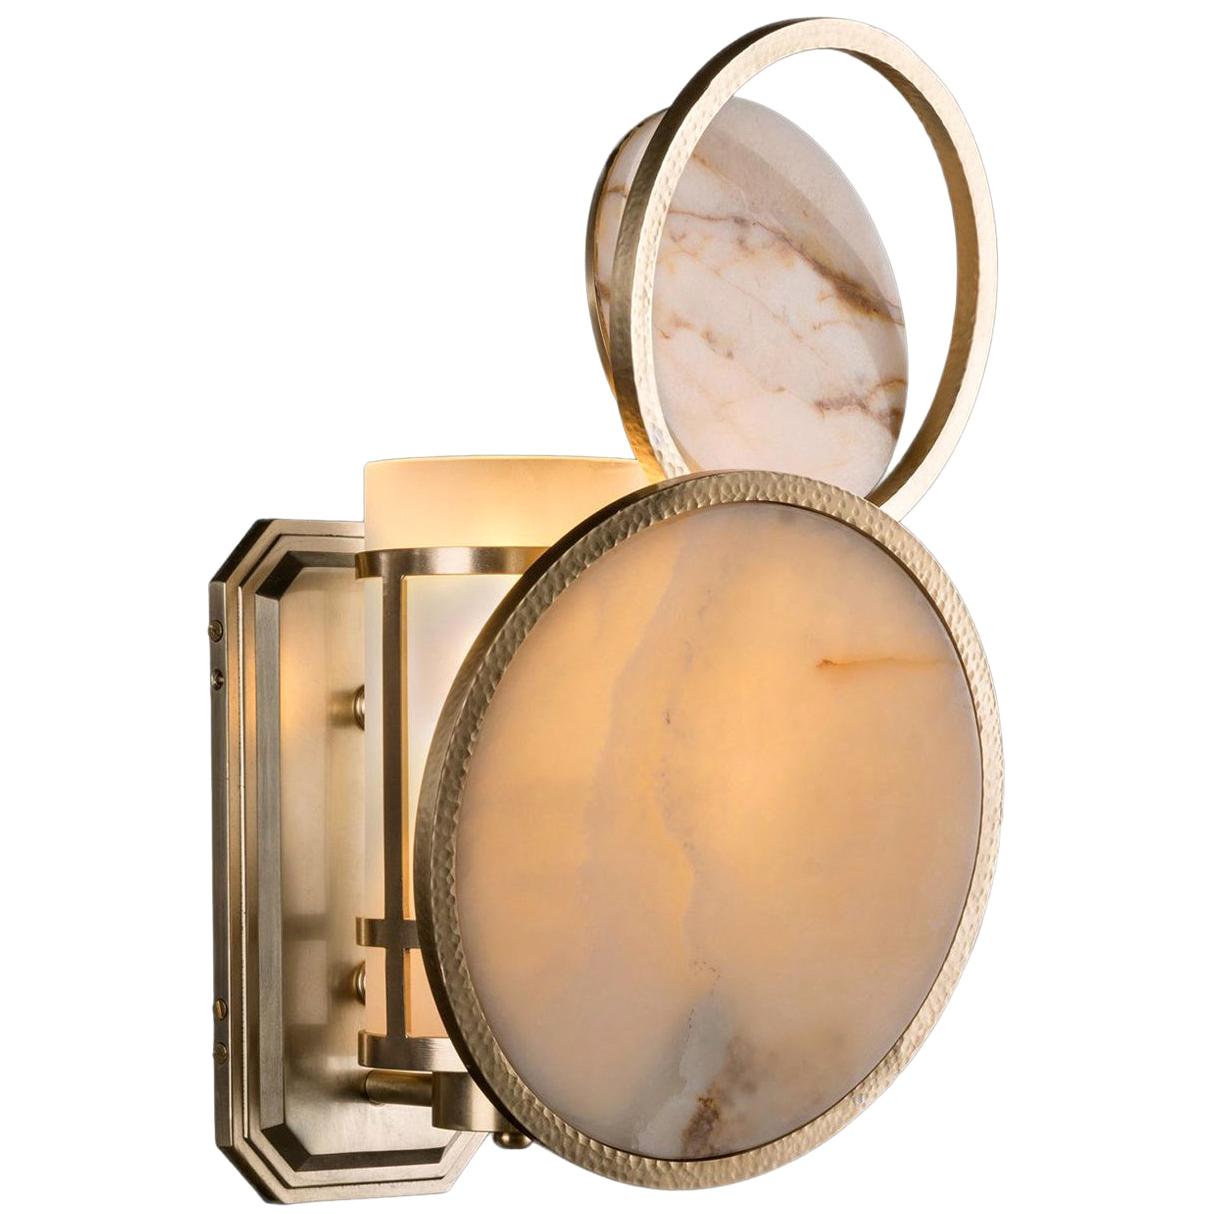 Eclipse Right Wall Sconce by Badari